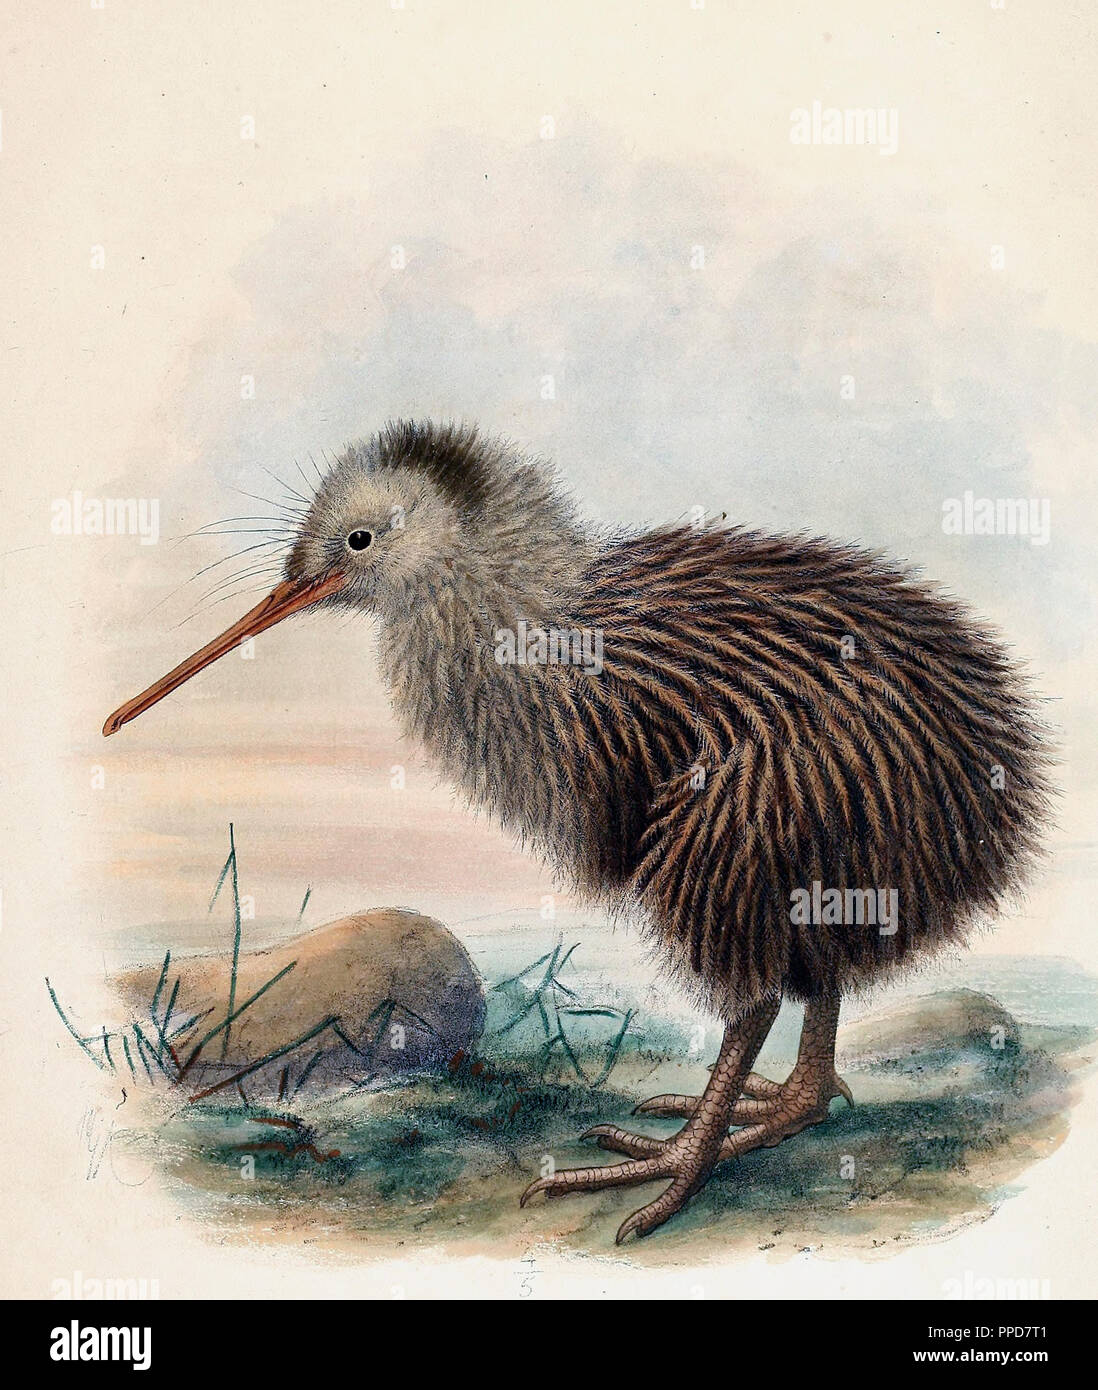 Apteryx Australis Juvenile - The southern brown kiwi, tokoeka, or common kiwi, Apteryx australis, is a species of kiwi from New Zealand's South Island Stock Photo